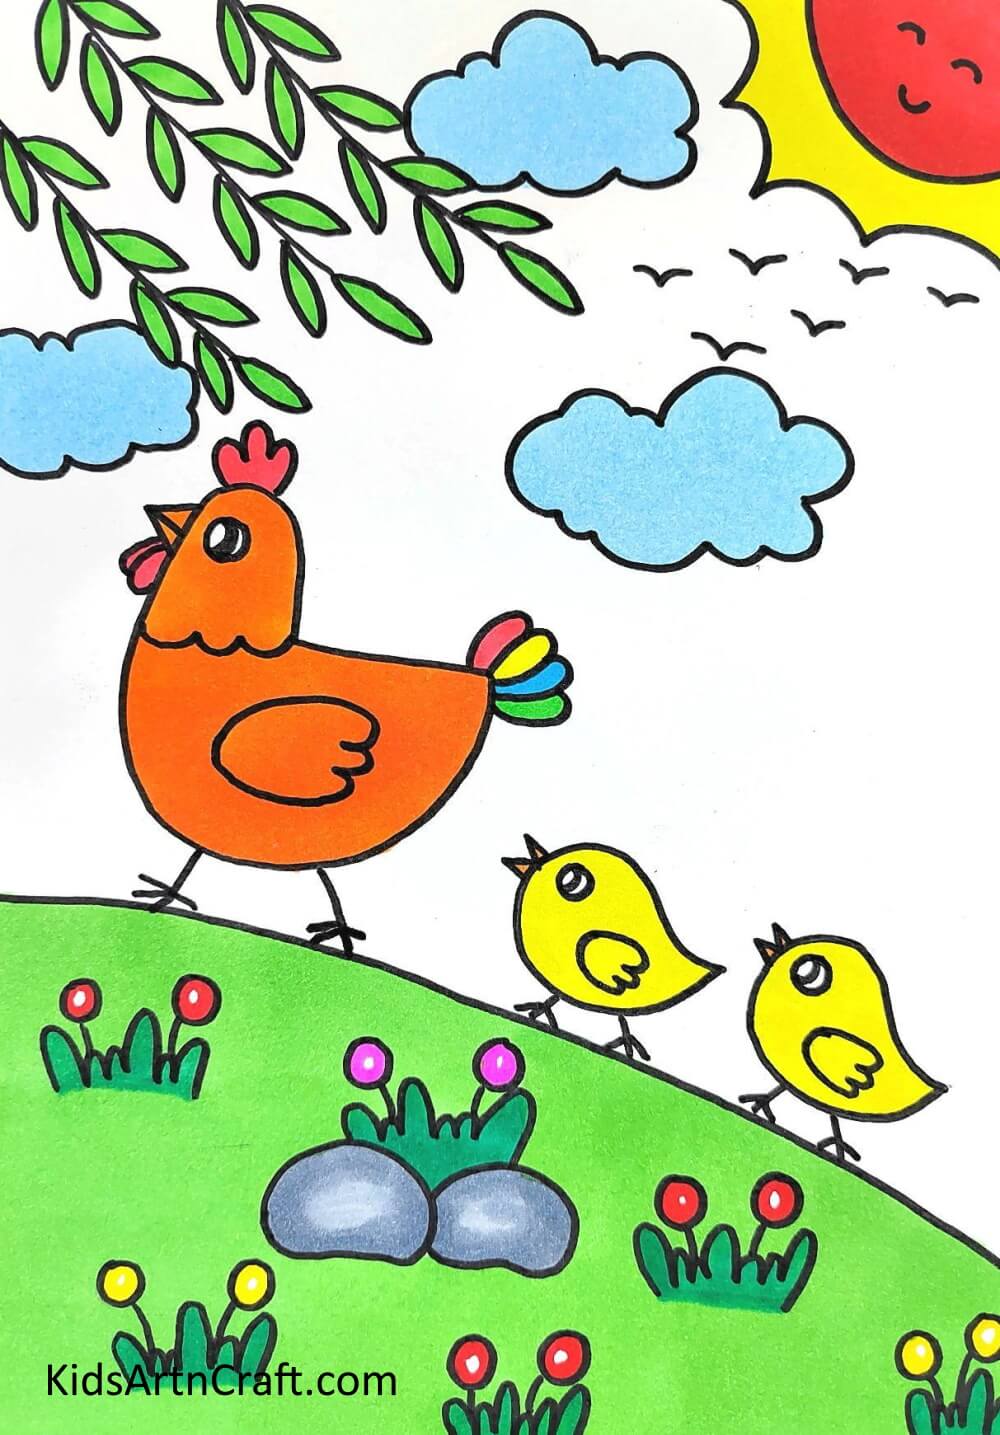 Add Splash of Colors To Your Drawing - A proposal for fledgling illustrators - Creating a Hen & Chicks Design